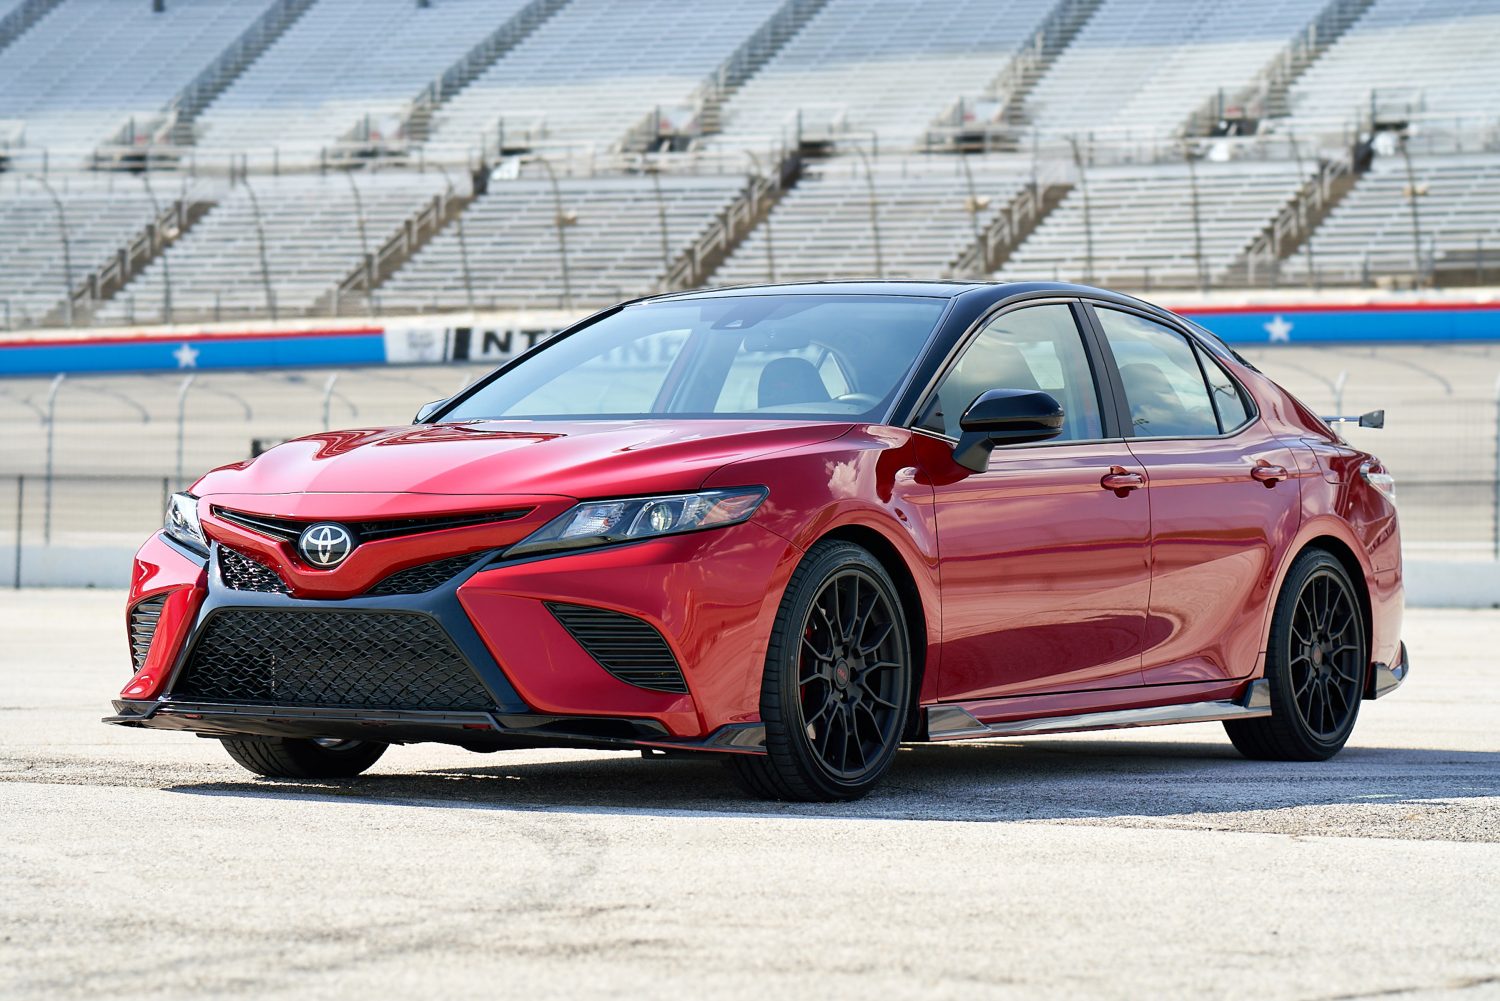 Toyota Brings the TRD Treatment to the Midsize Camry Sedan — Auto